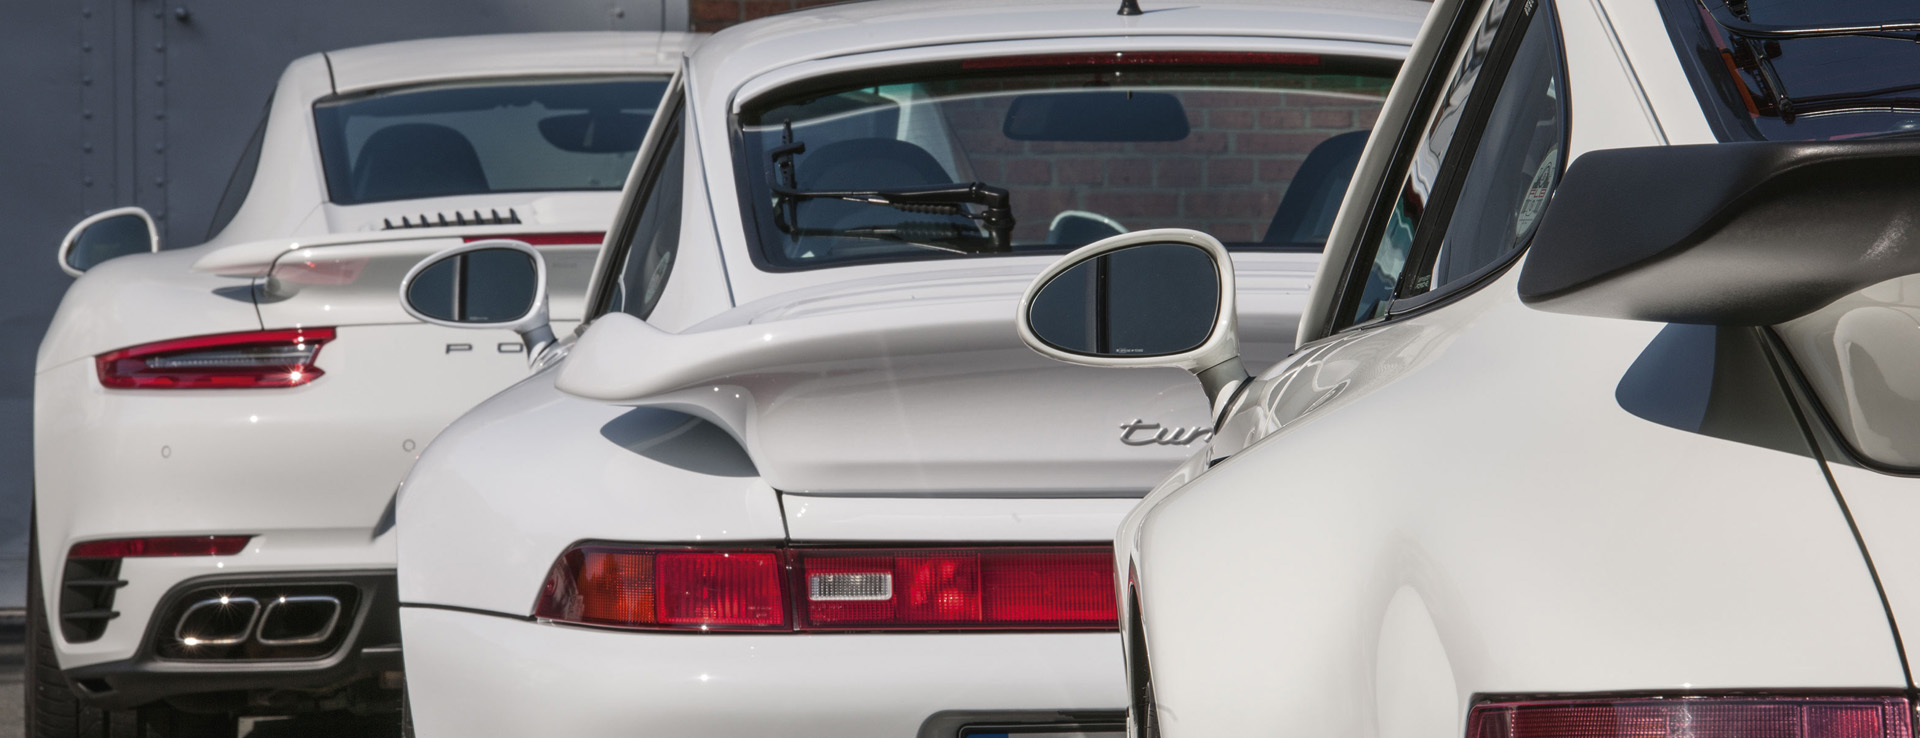 View of line of Porsche 911 sportscars and rear wings